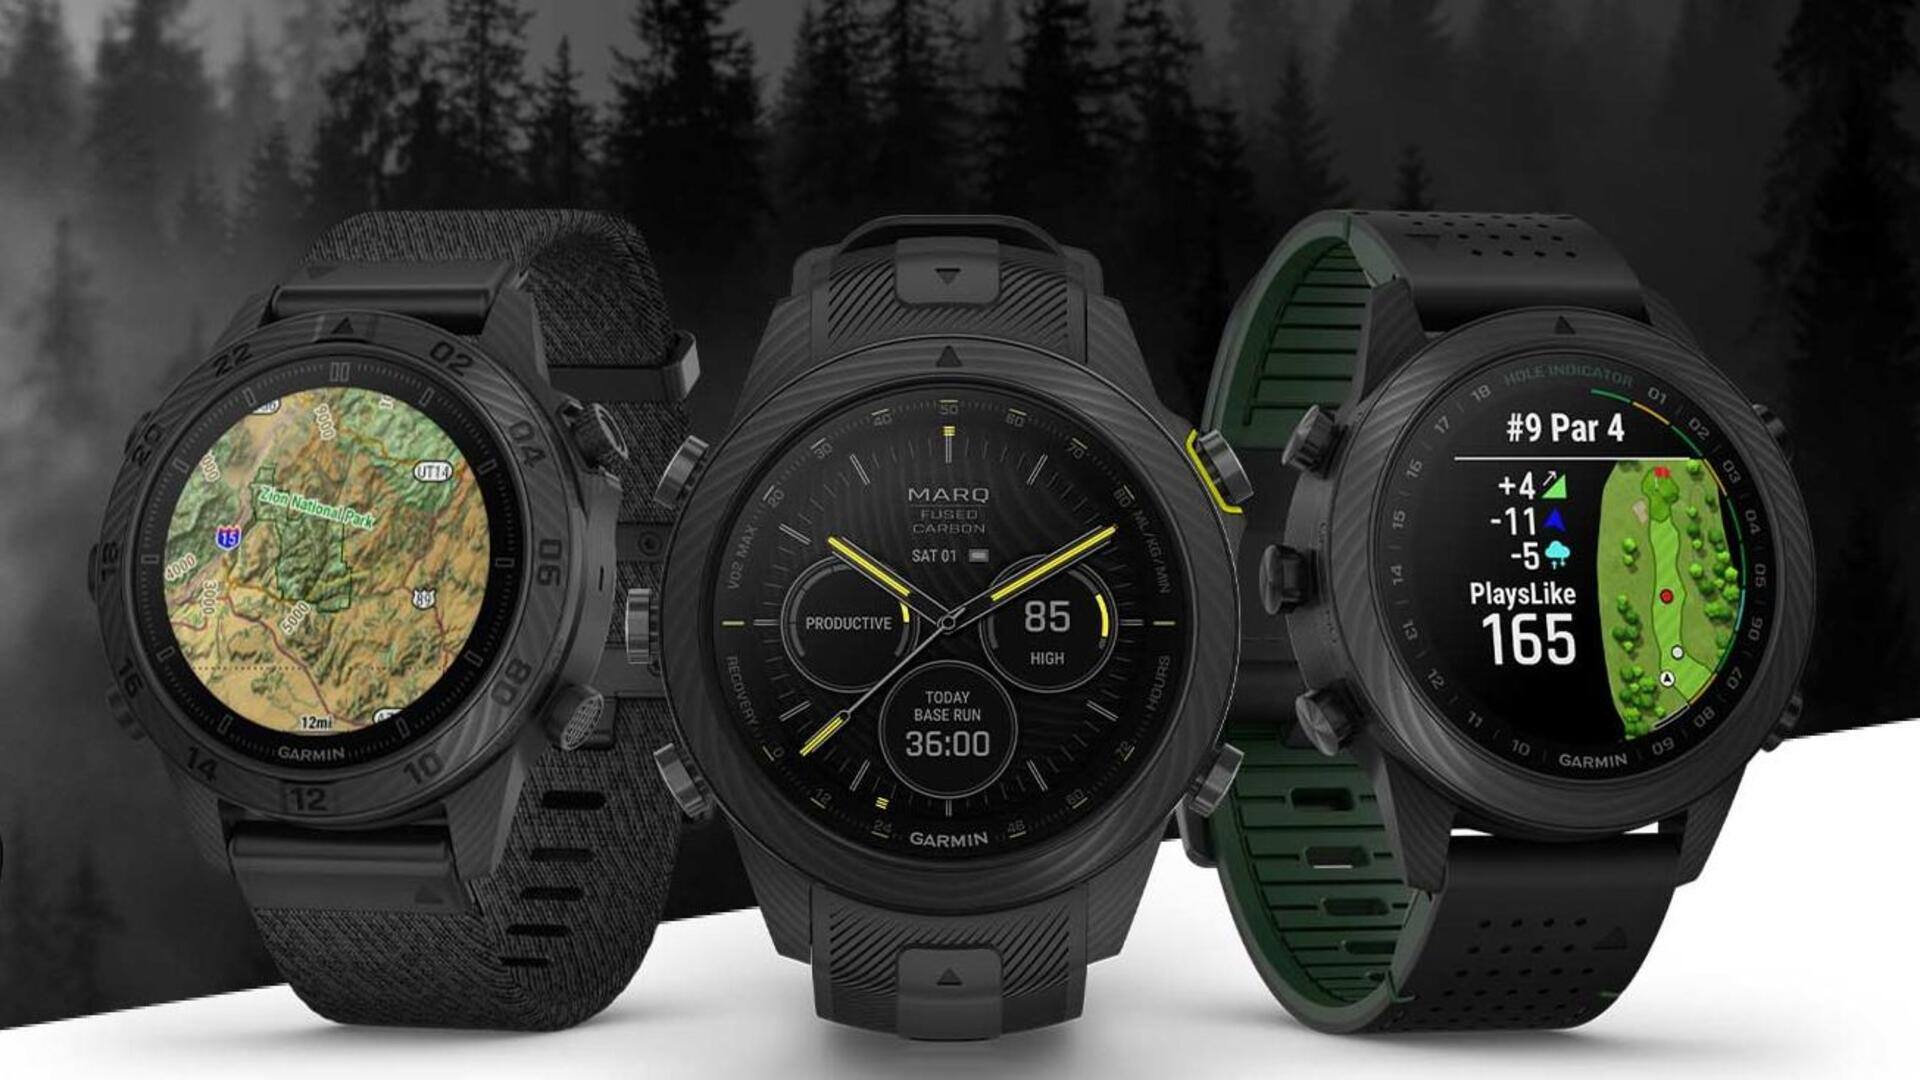 Garmin MARQ Carbon Collection smartwatches revealed: Check prices, features